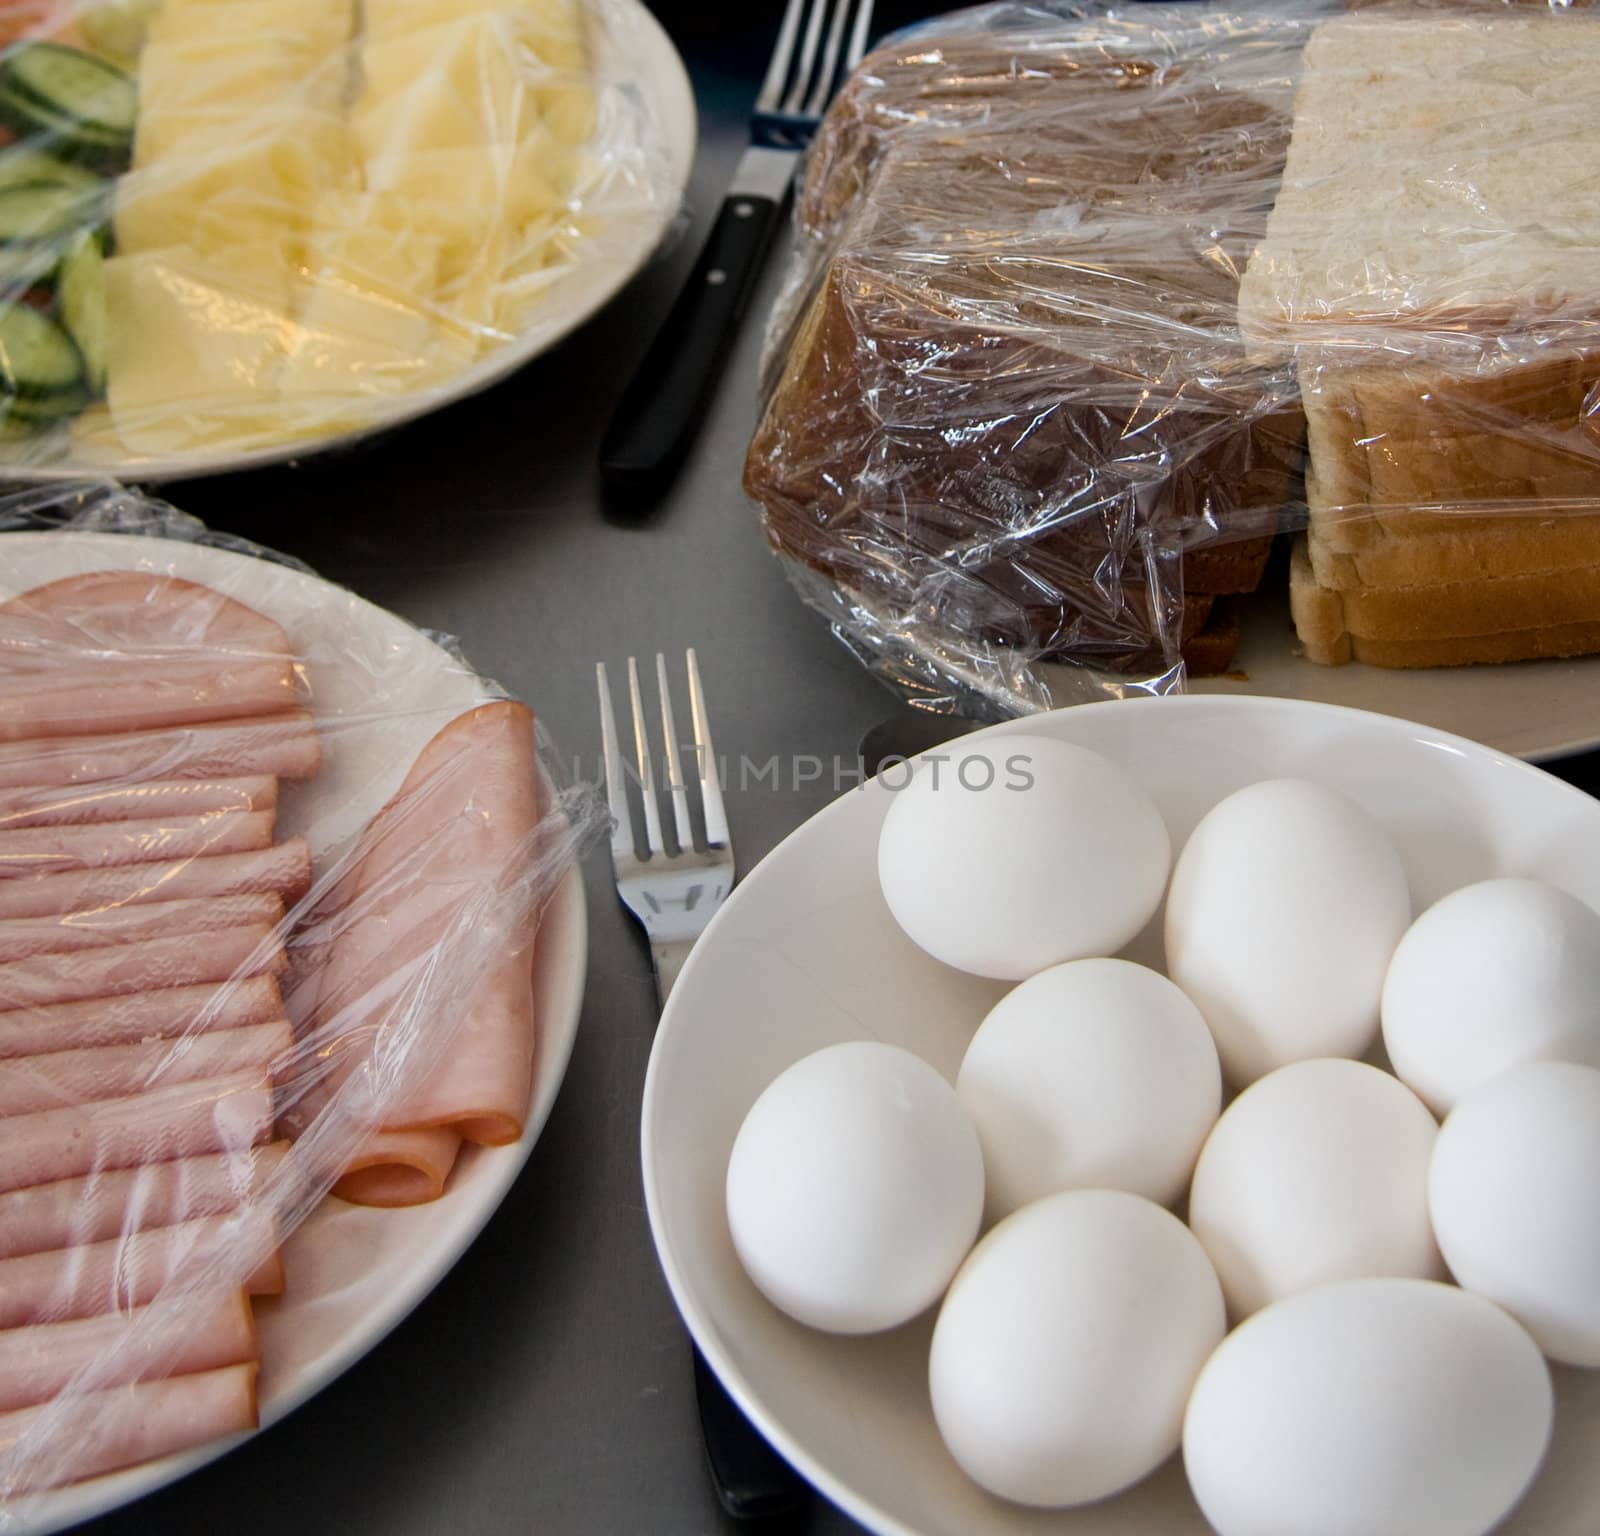 eggs ham cheese bread with plastic film on wating for beeing served.